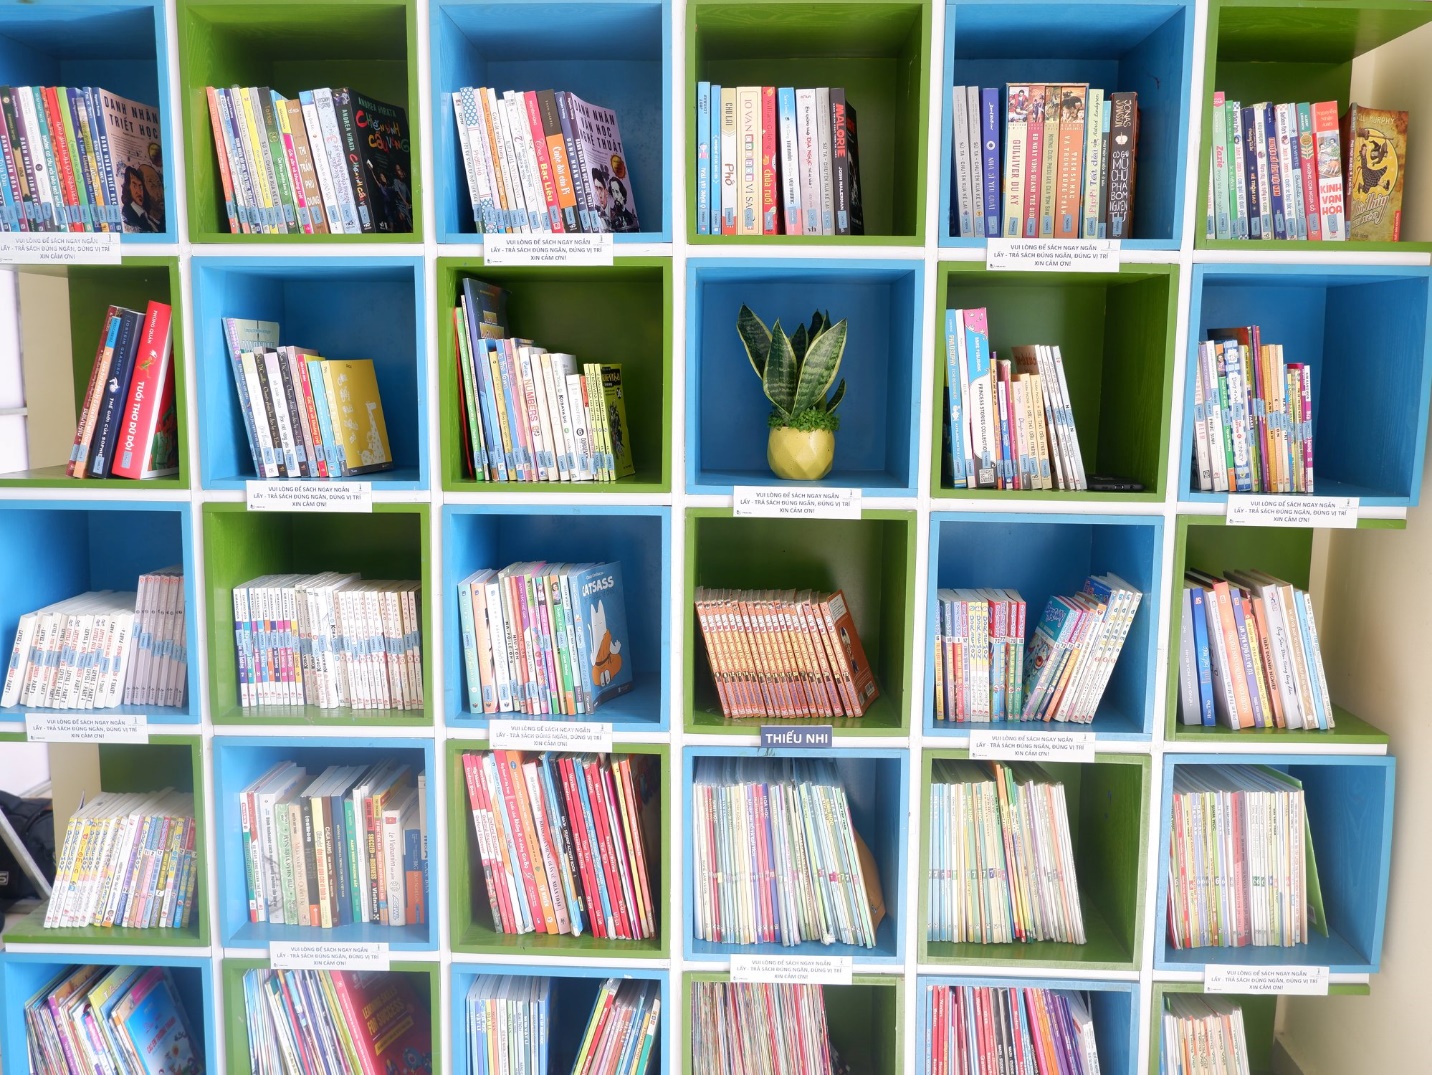 The bookcase is fully replenished with genres such as fiction, education, health, science...